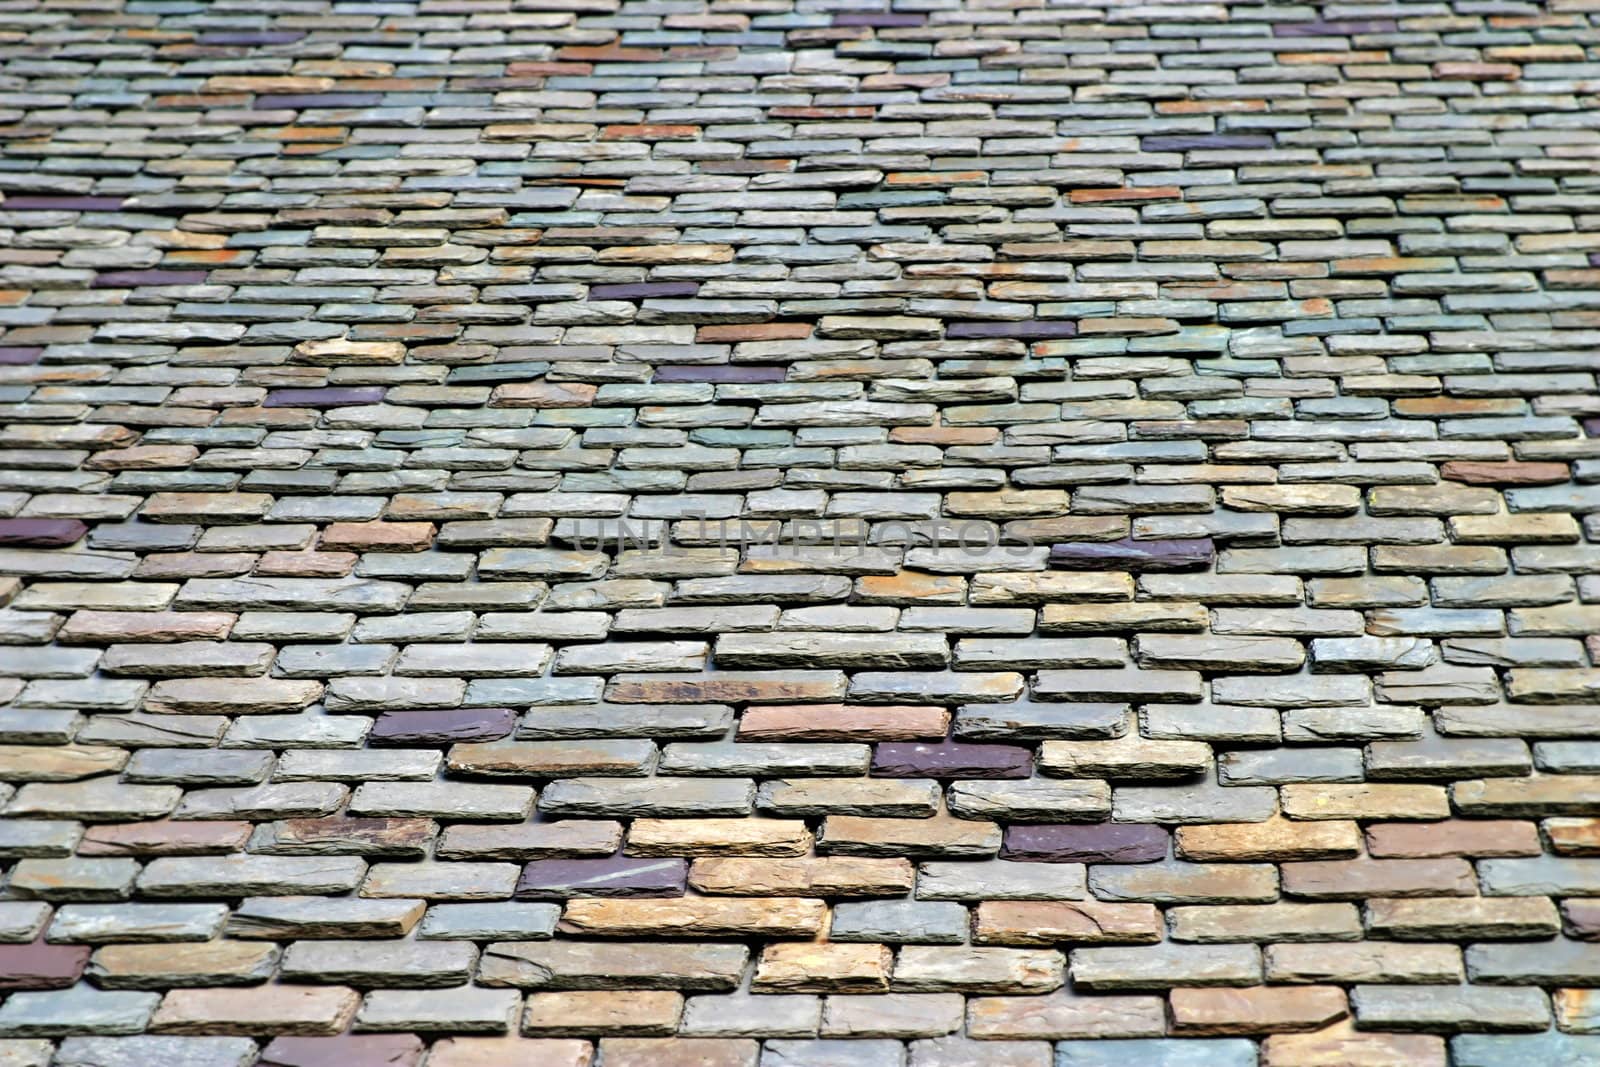 Colorful stone roof tiles from below